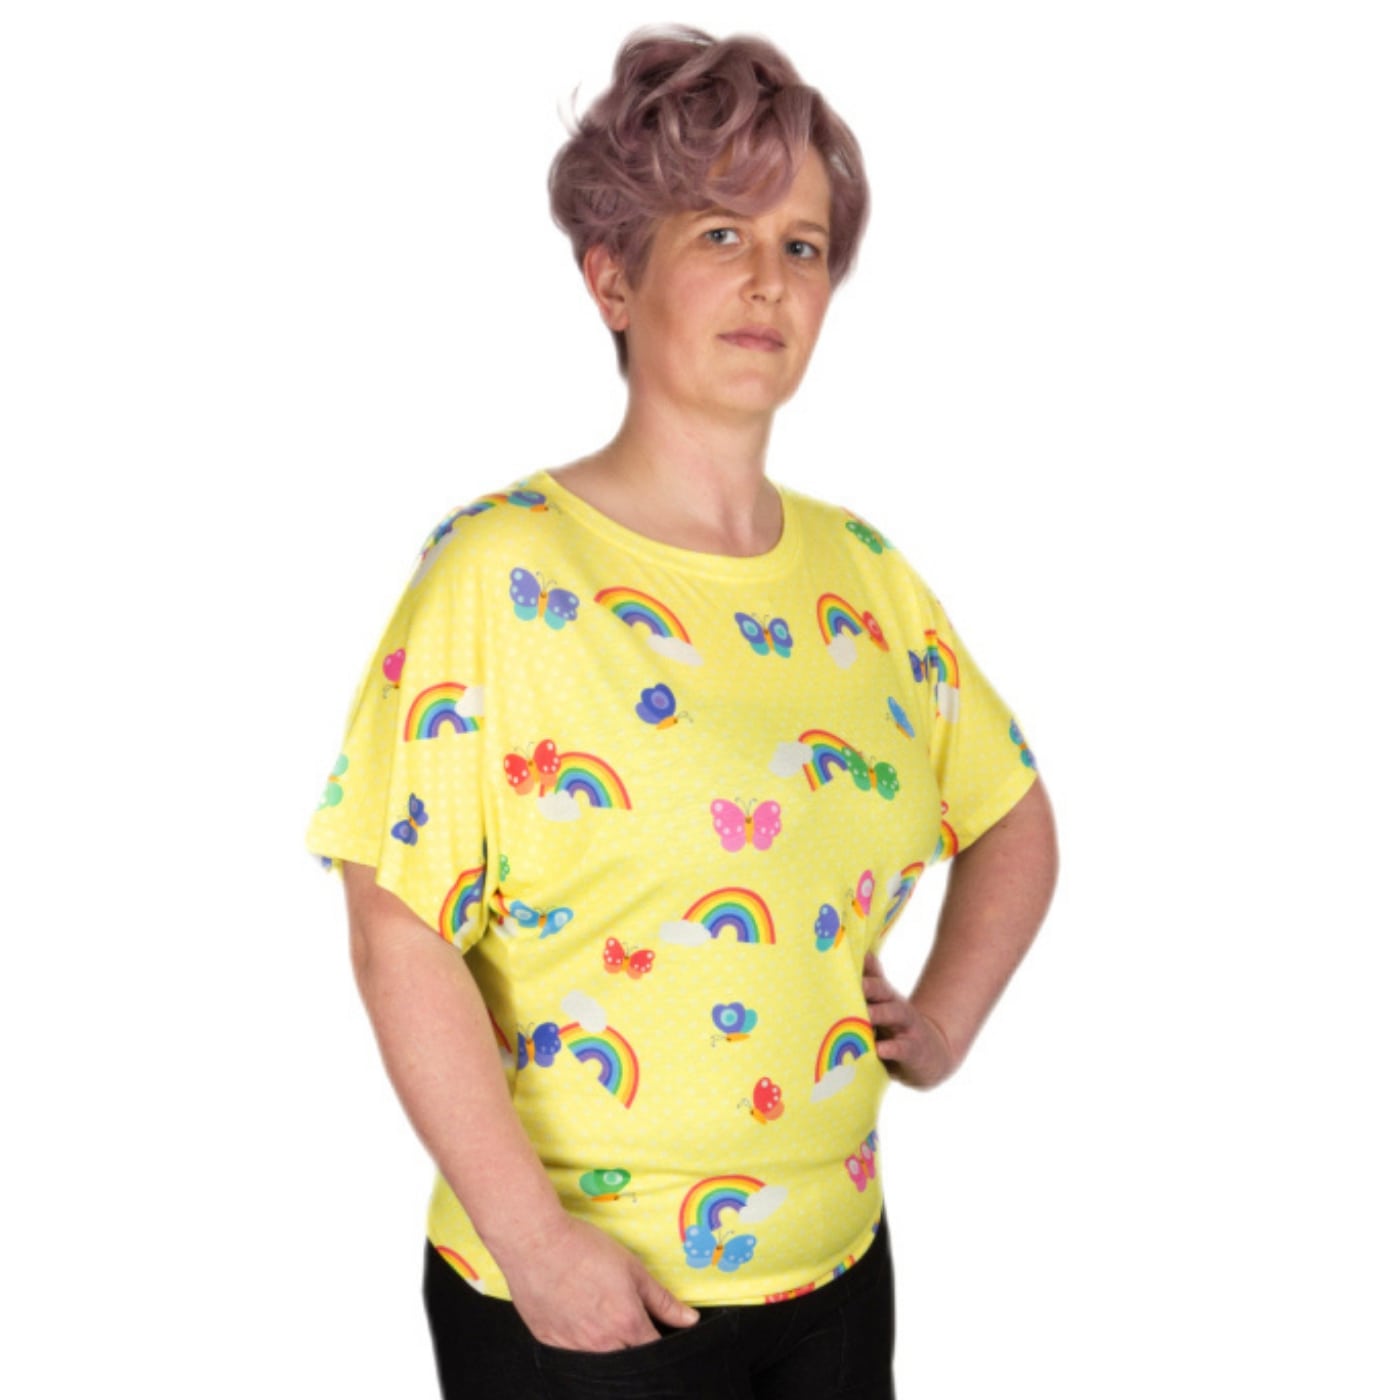 Sunshine Batwing Top by RainbowsAndFairies.com.au (Yellow Polka Dot - Butterfly - Rainbows - Clouds - Vintage Inspired - Kitsch - Knit Top - Mod) - SKU: CL_BATOP_SUNSH_ORG - Pic-05